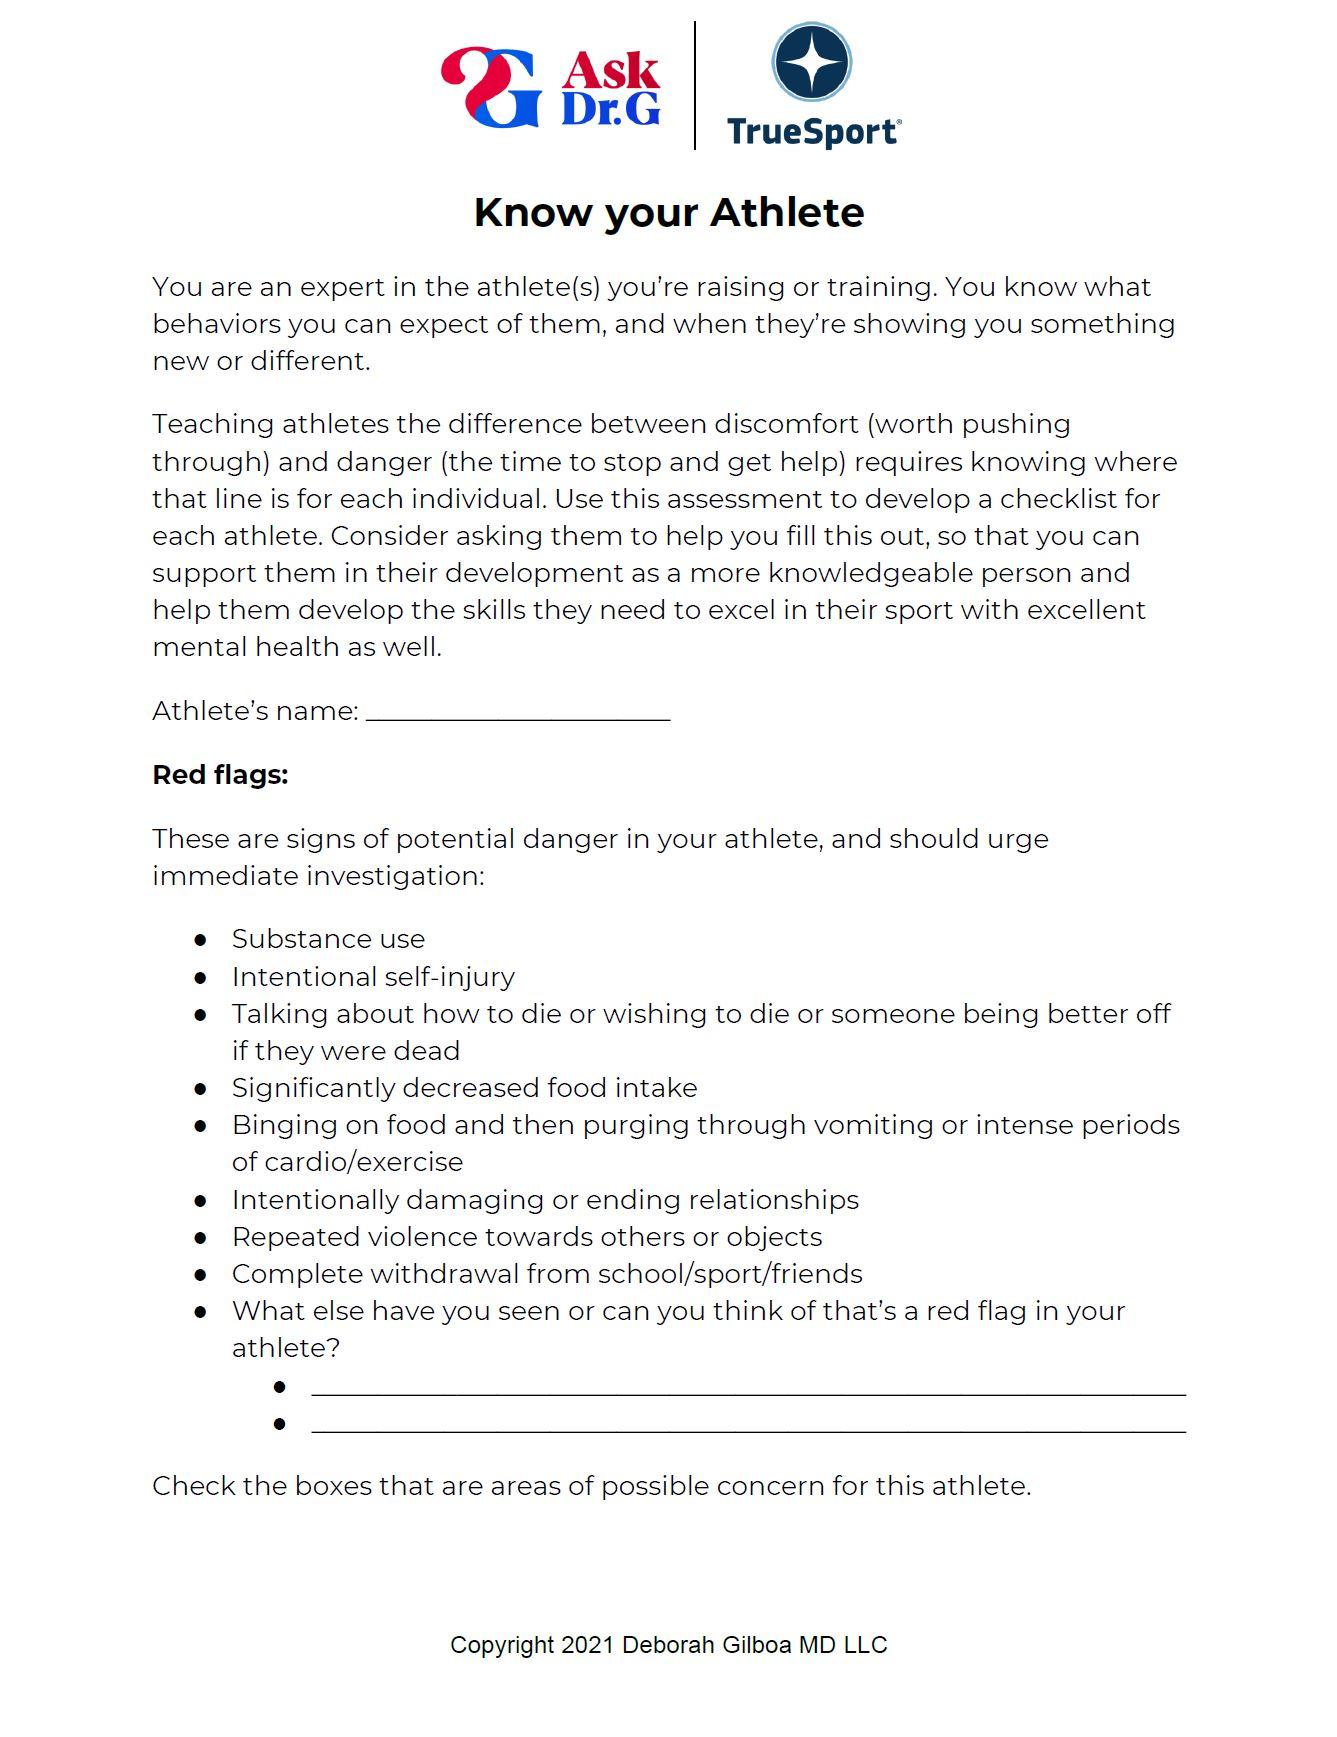 Cover of Dr. G's know your athlete PDF.